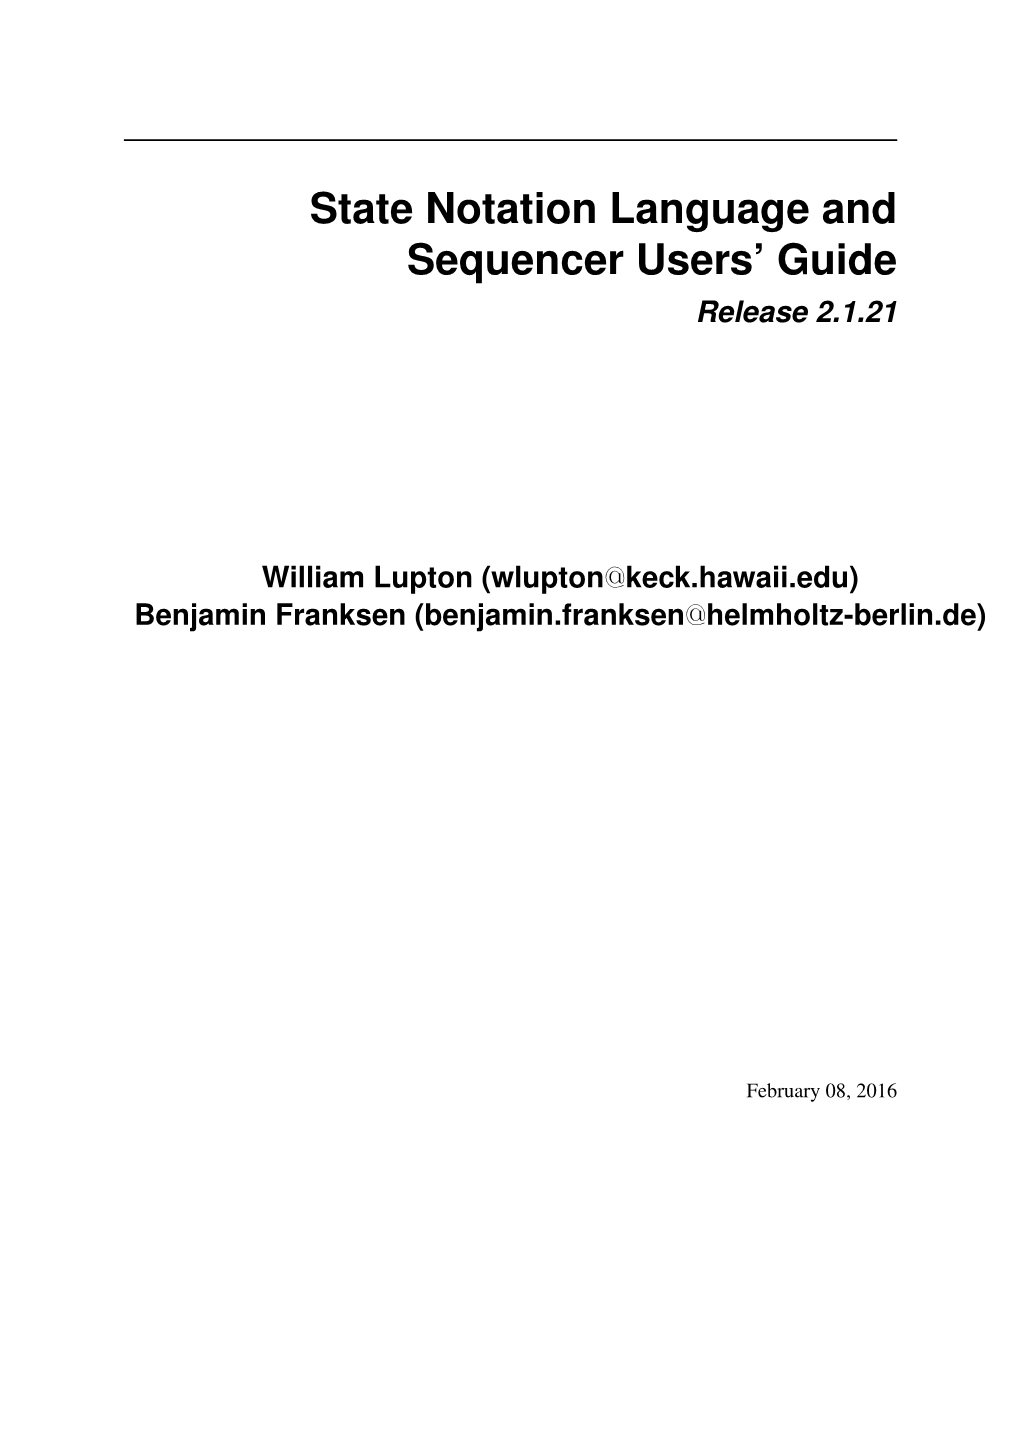 State Notation Language and Sequencer Users' Guide